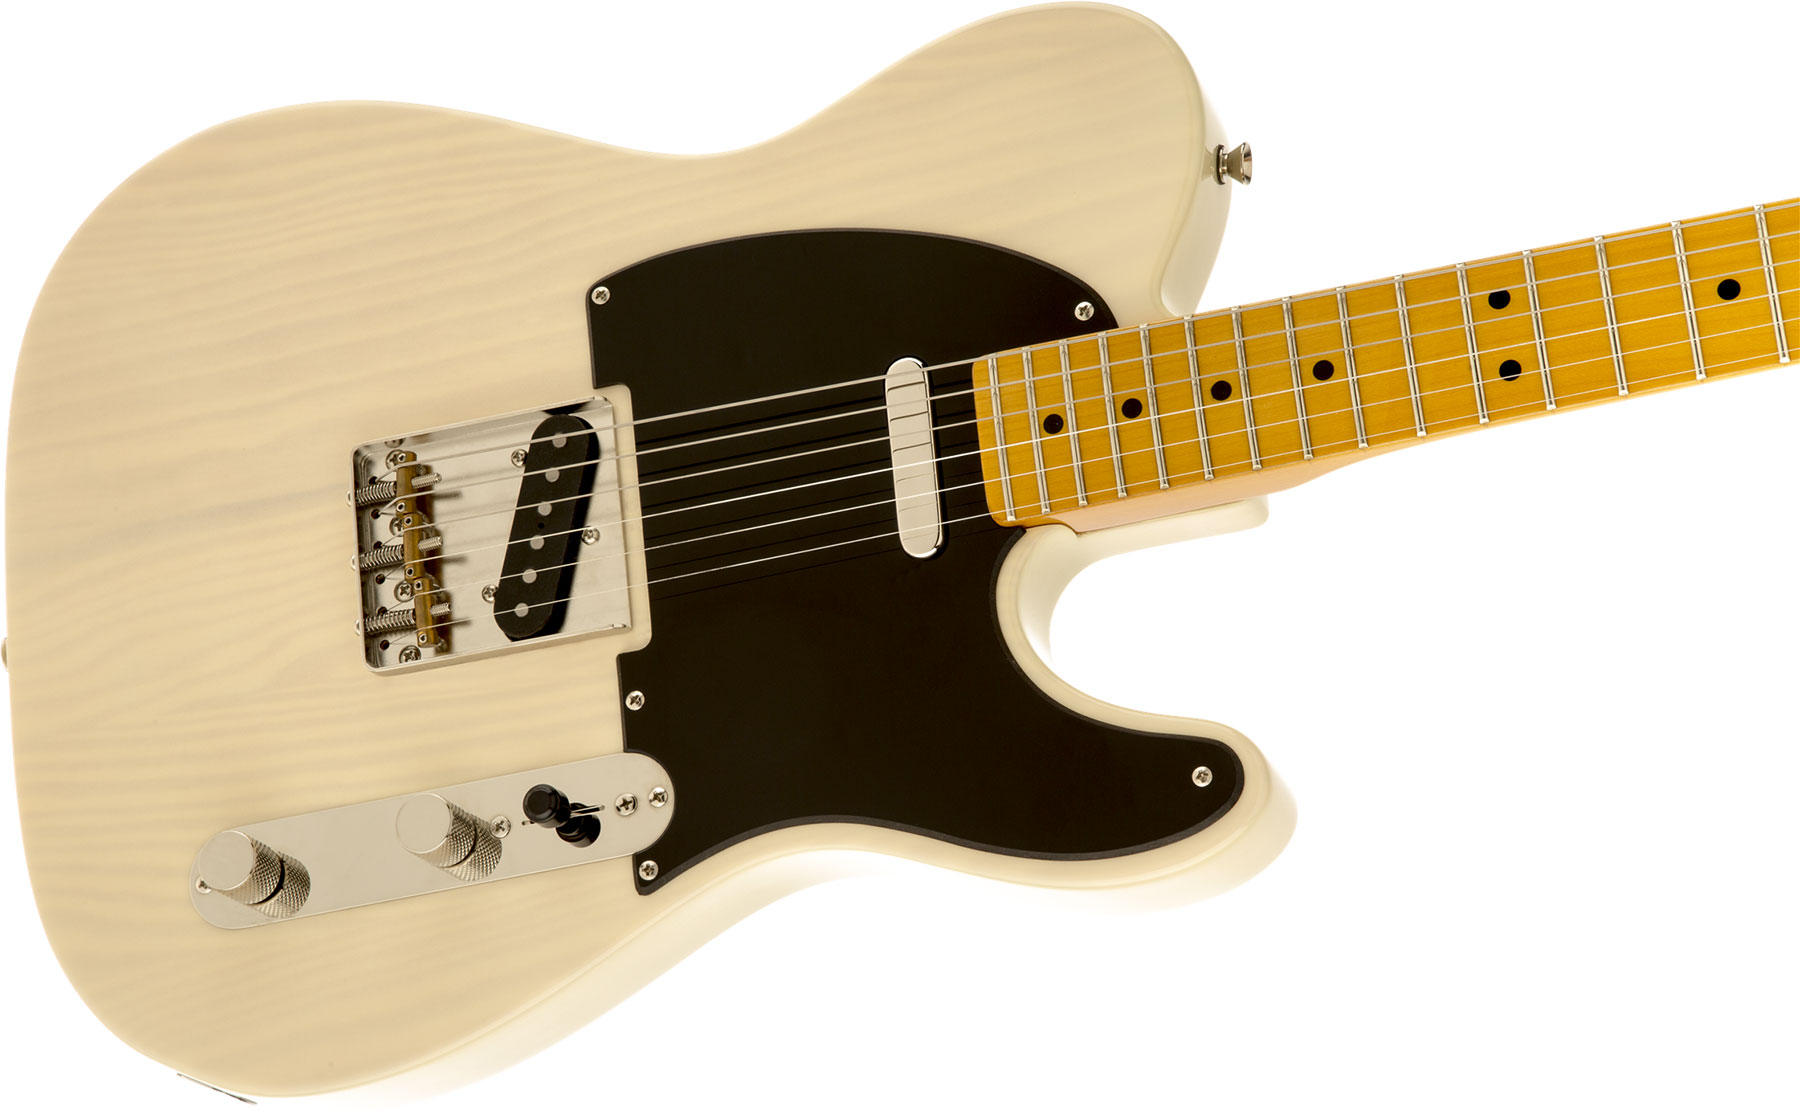 Squier Classic Vibe Telecaster '50s Mn - Vintage Blonde - Tel shape electric guitar - Variation 2